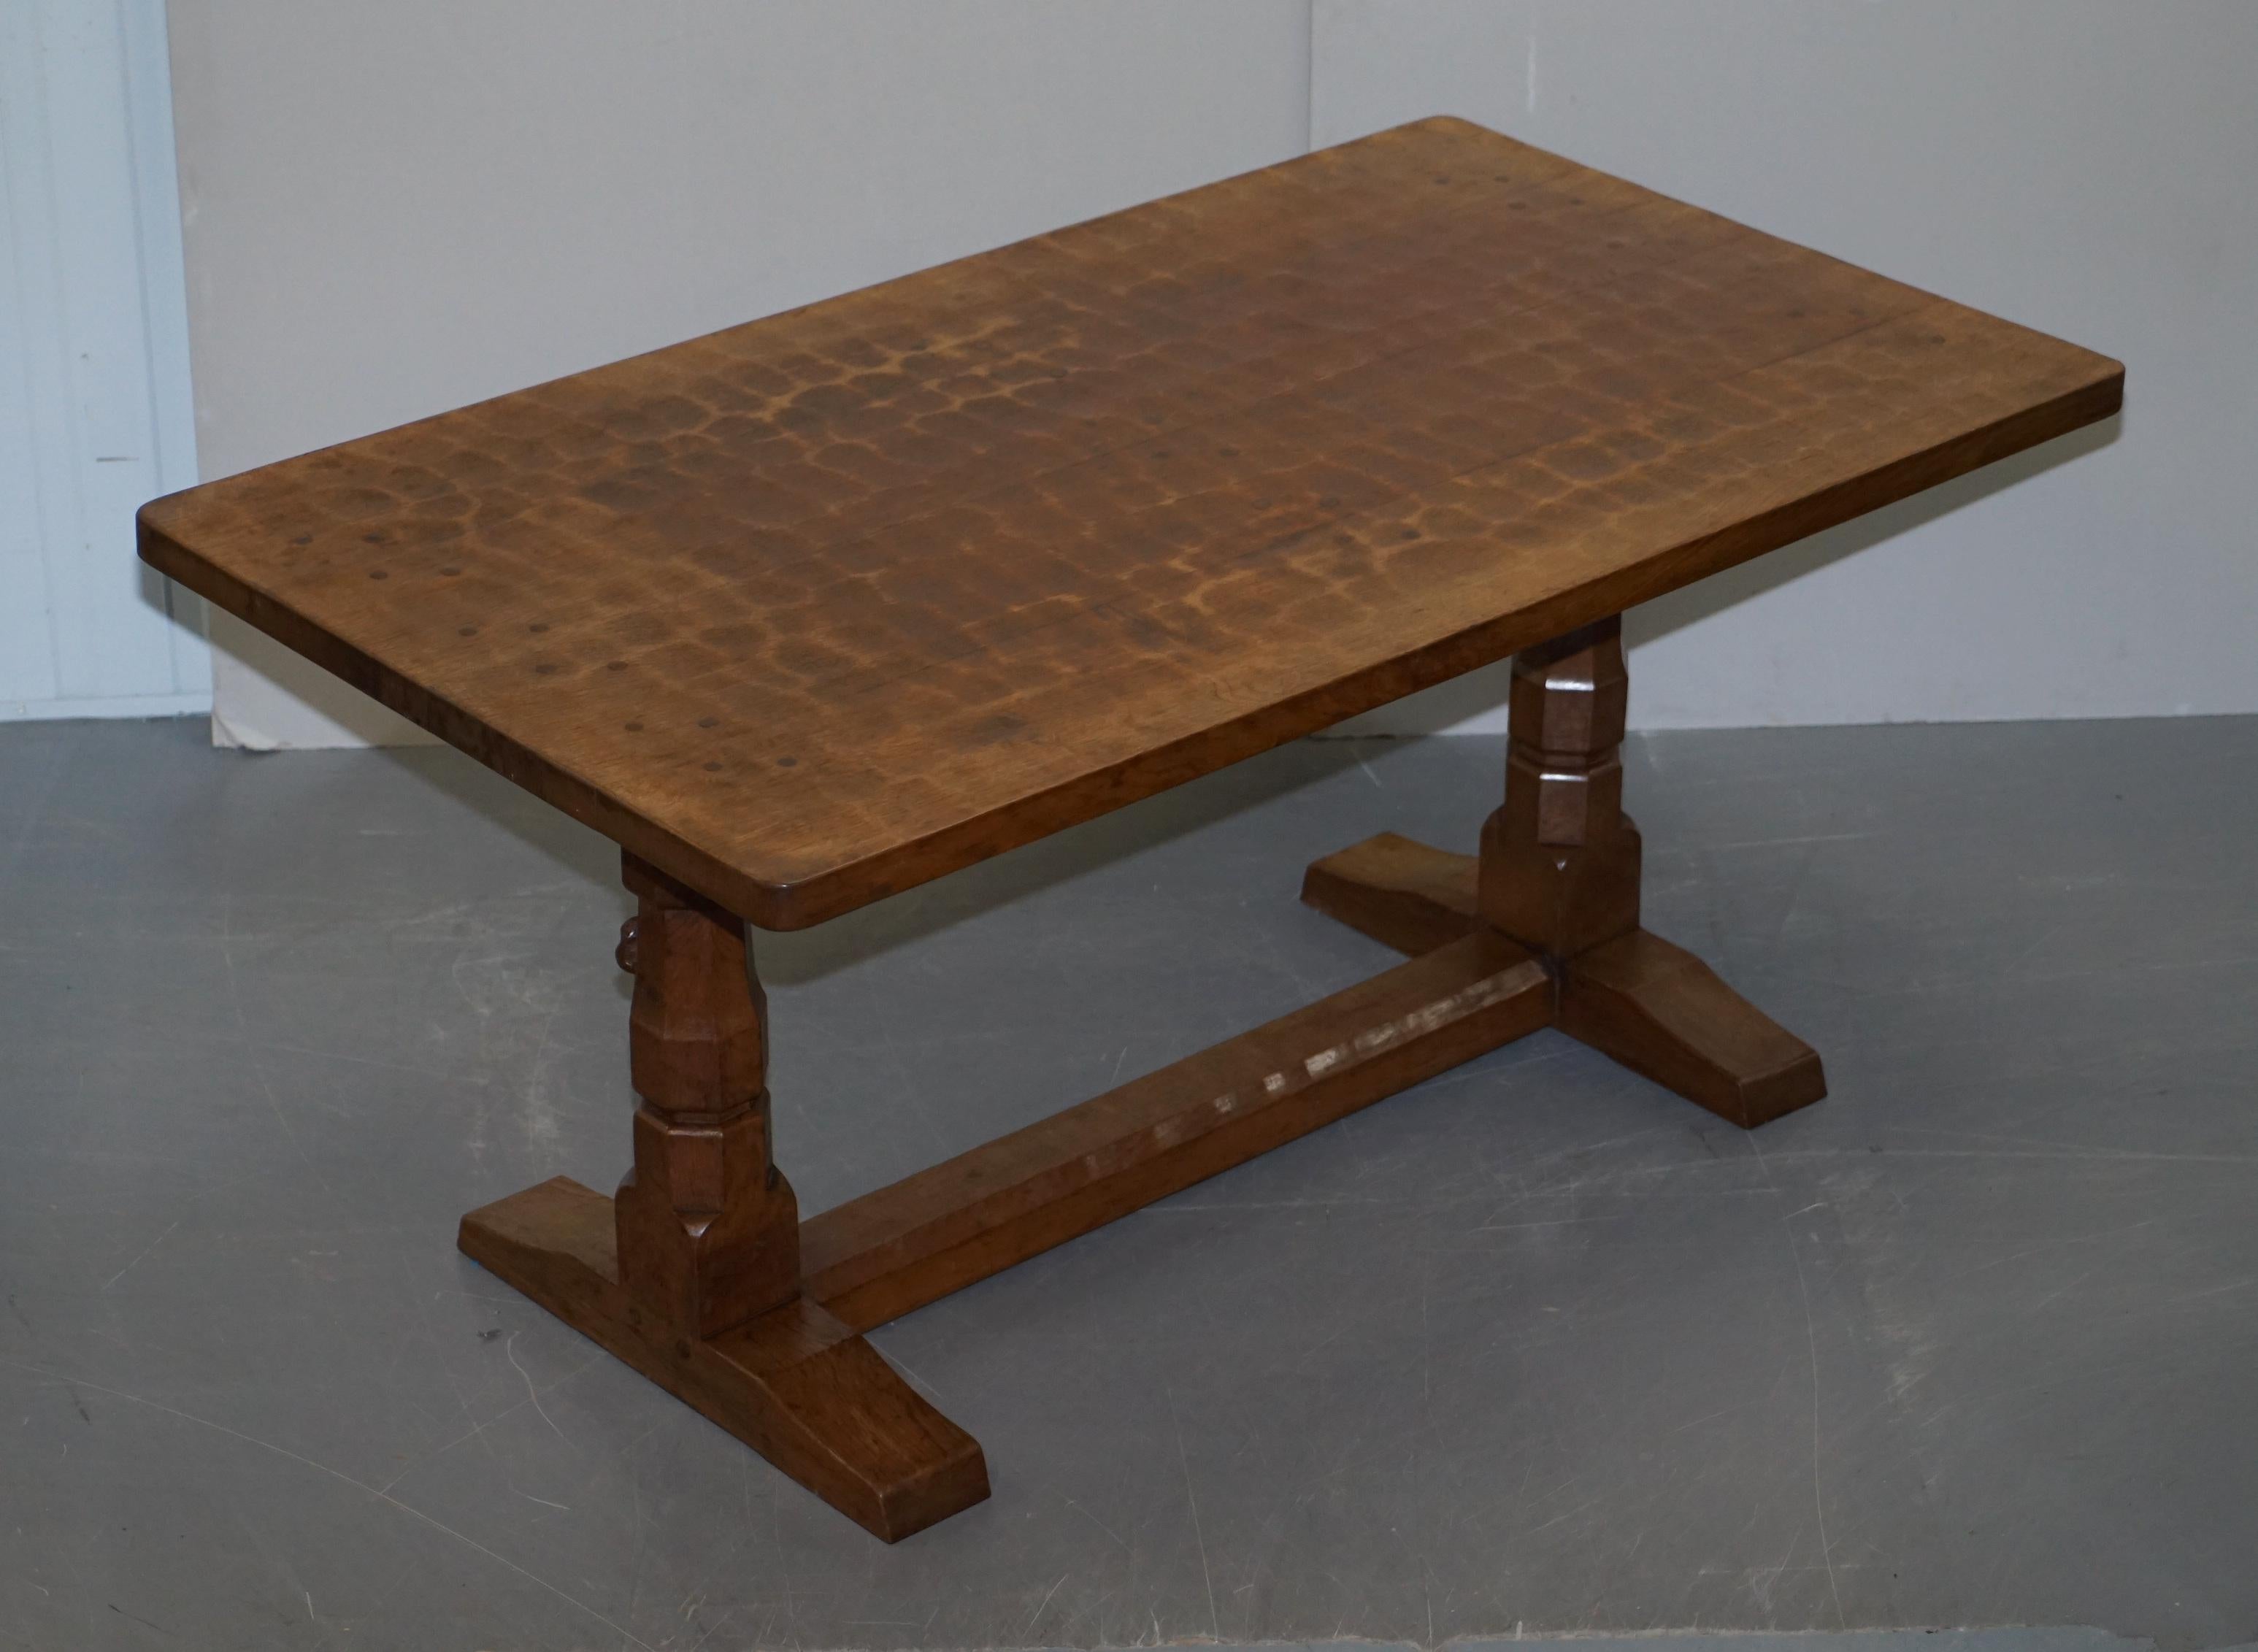 We are delighted to offer for sale this very collectable early circa 1950s Robert Mouseman Thompson English oak refectory dining table with sublime patination

If you are reading this listing then the chances are you know exactly what this is.